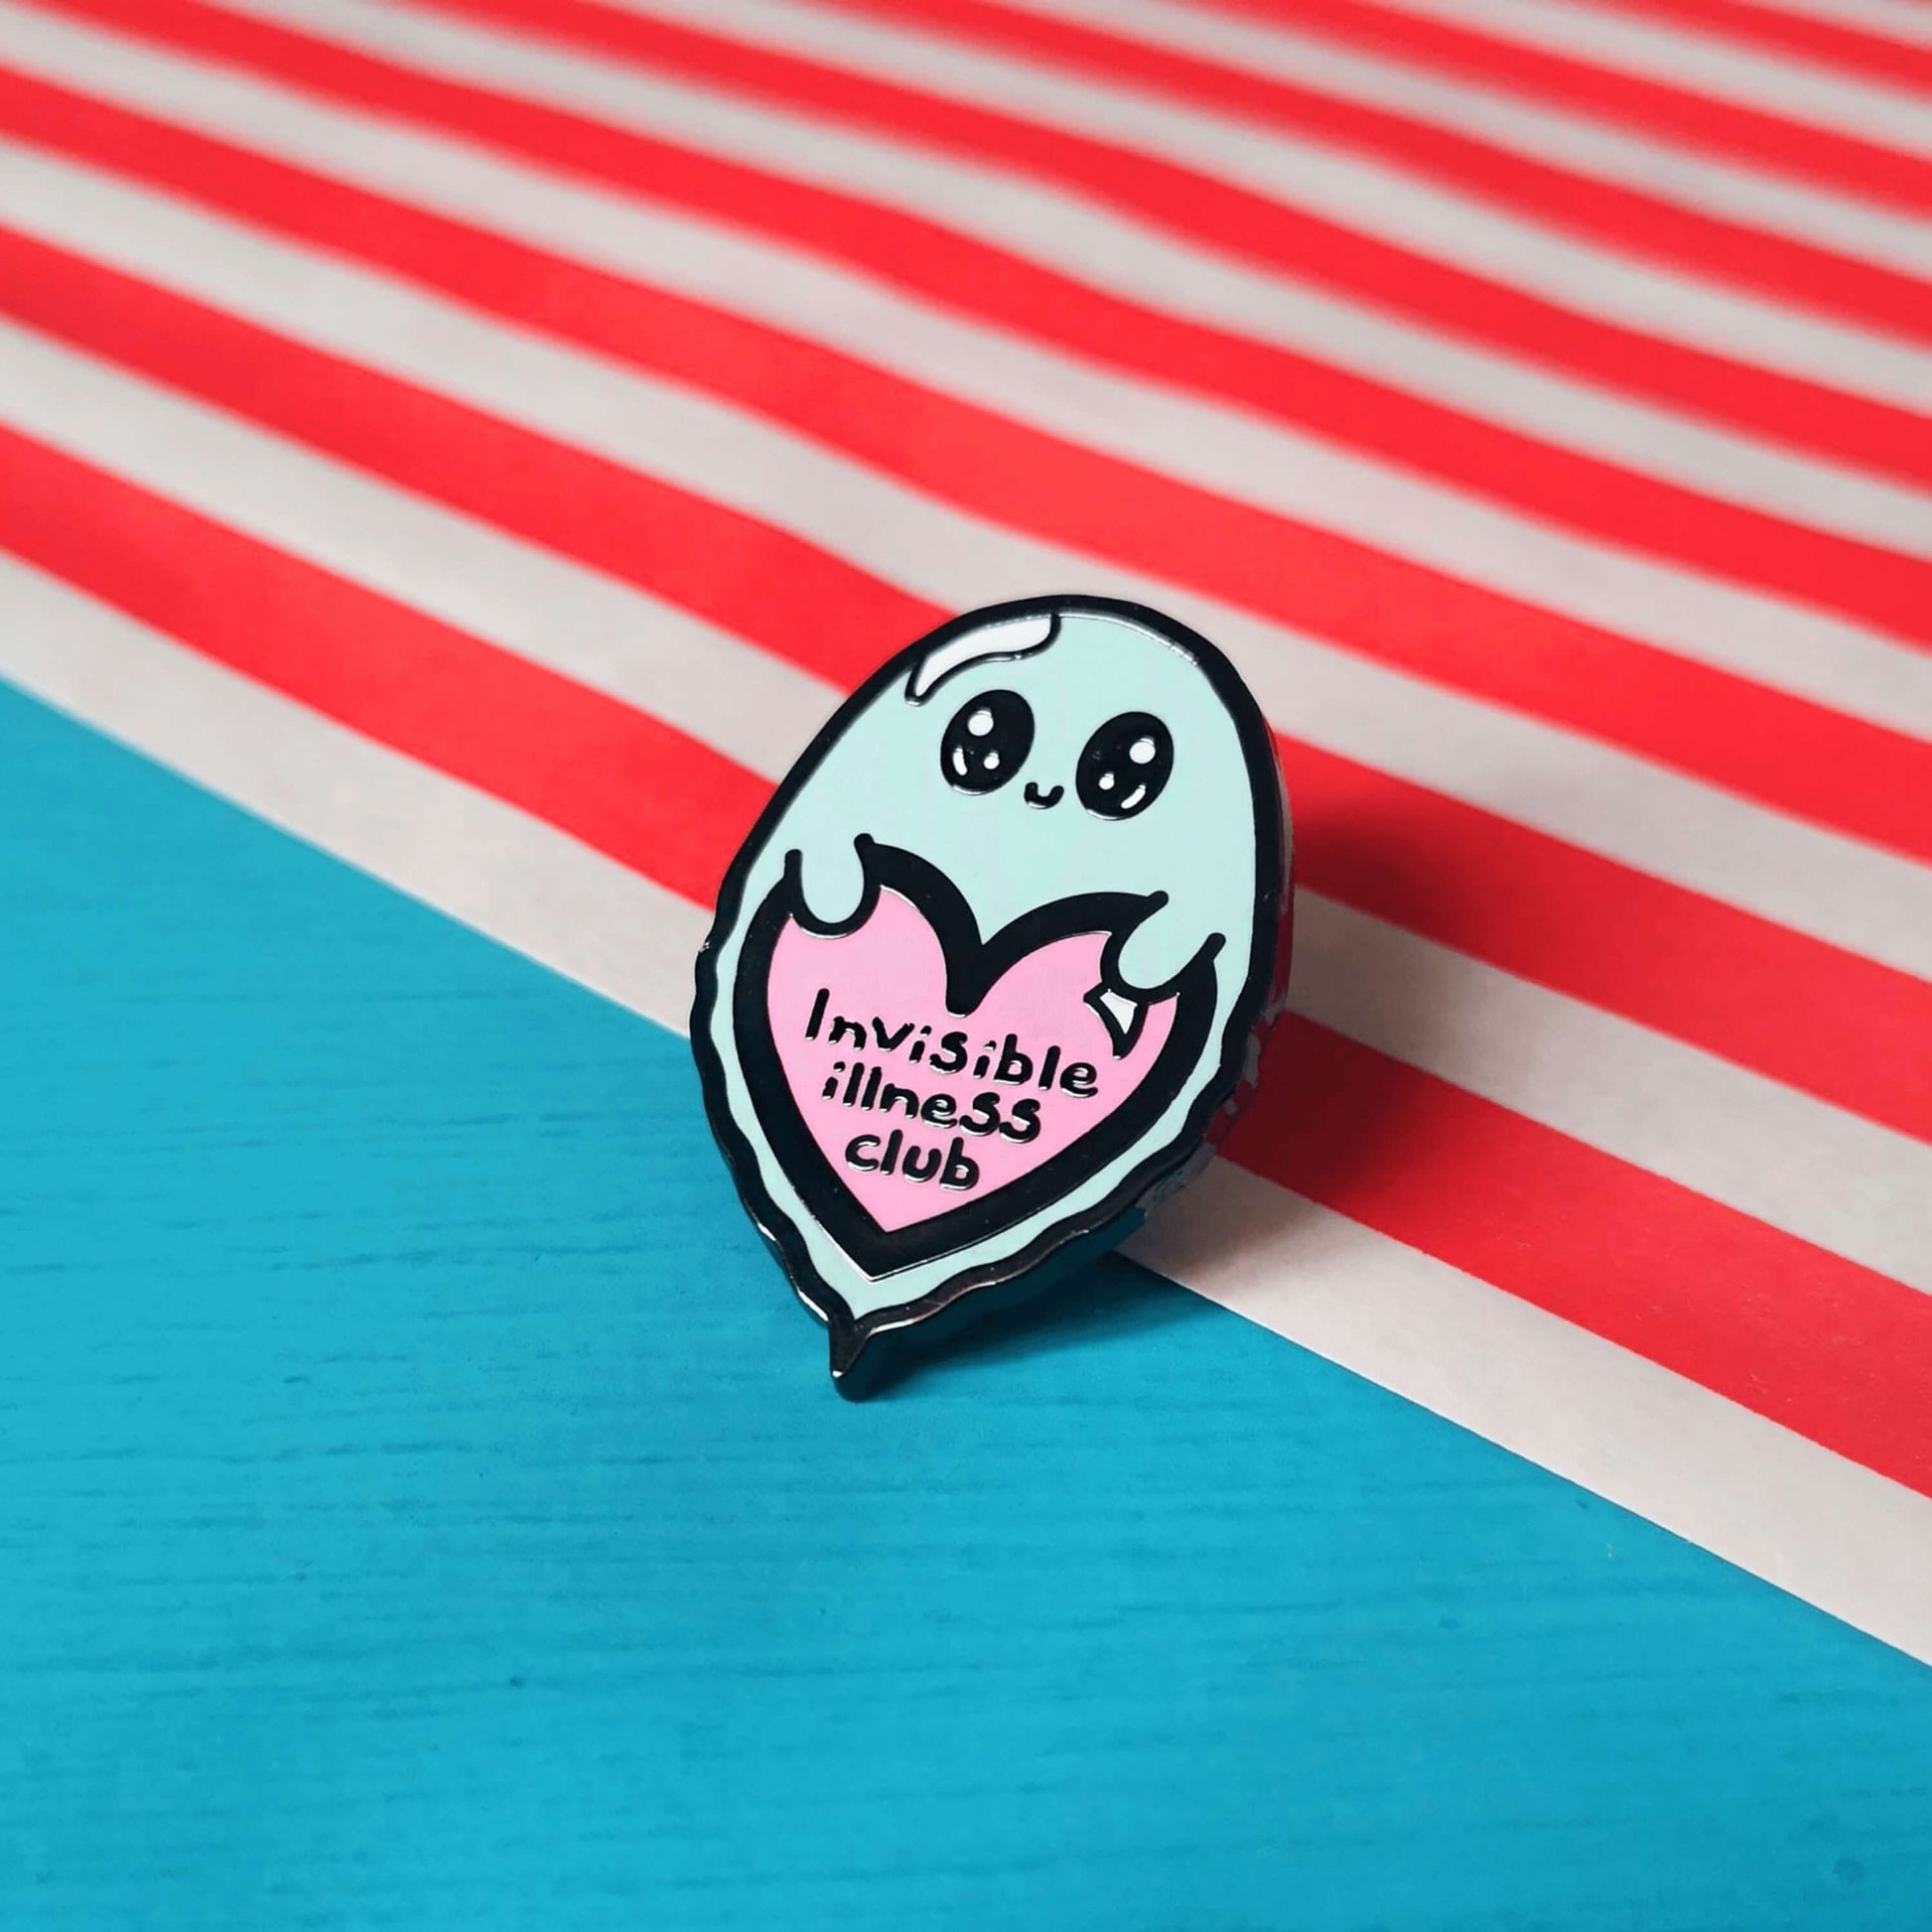 A cute blue ghost enamel pin with wide sparkly eyes and little smile holding a pink heart with it's little hands. 'Invisible illness club' is written in the heart in black. The enamel pin is on a red and white striped and blue background. Raising awareness for invisible illnesses.